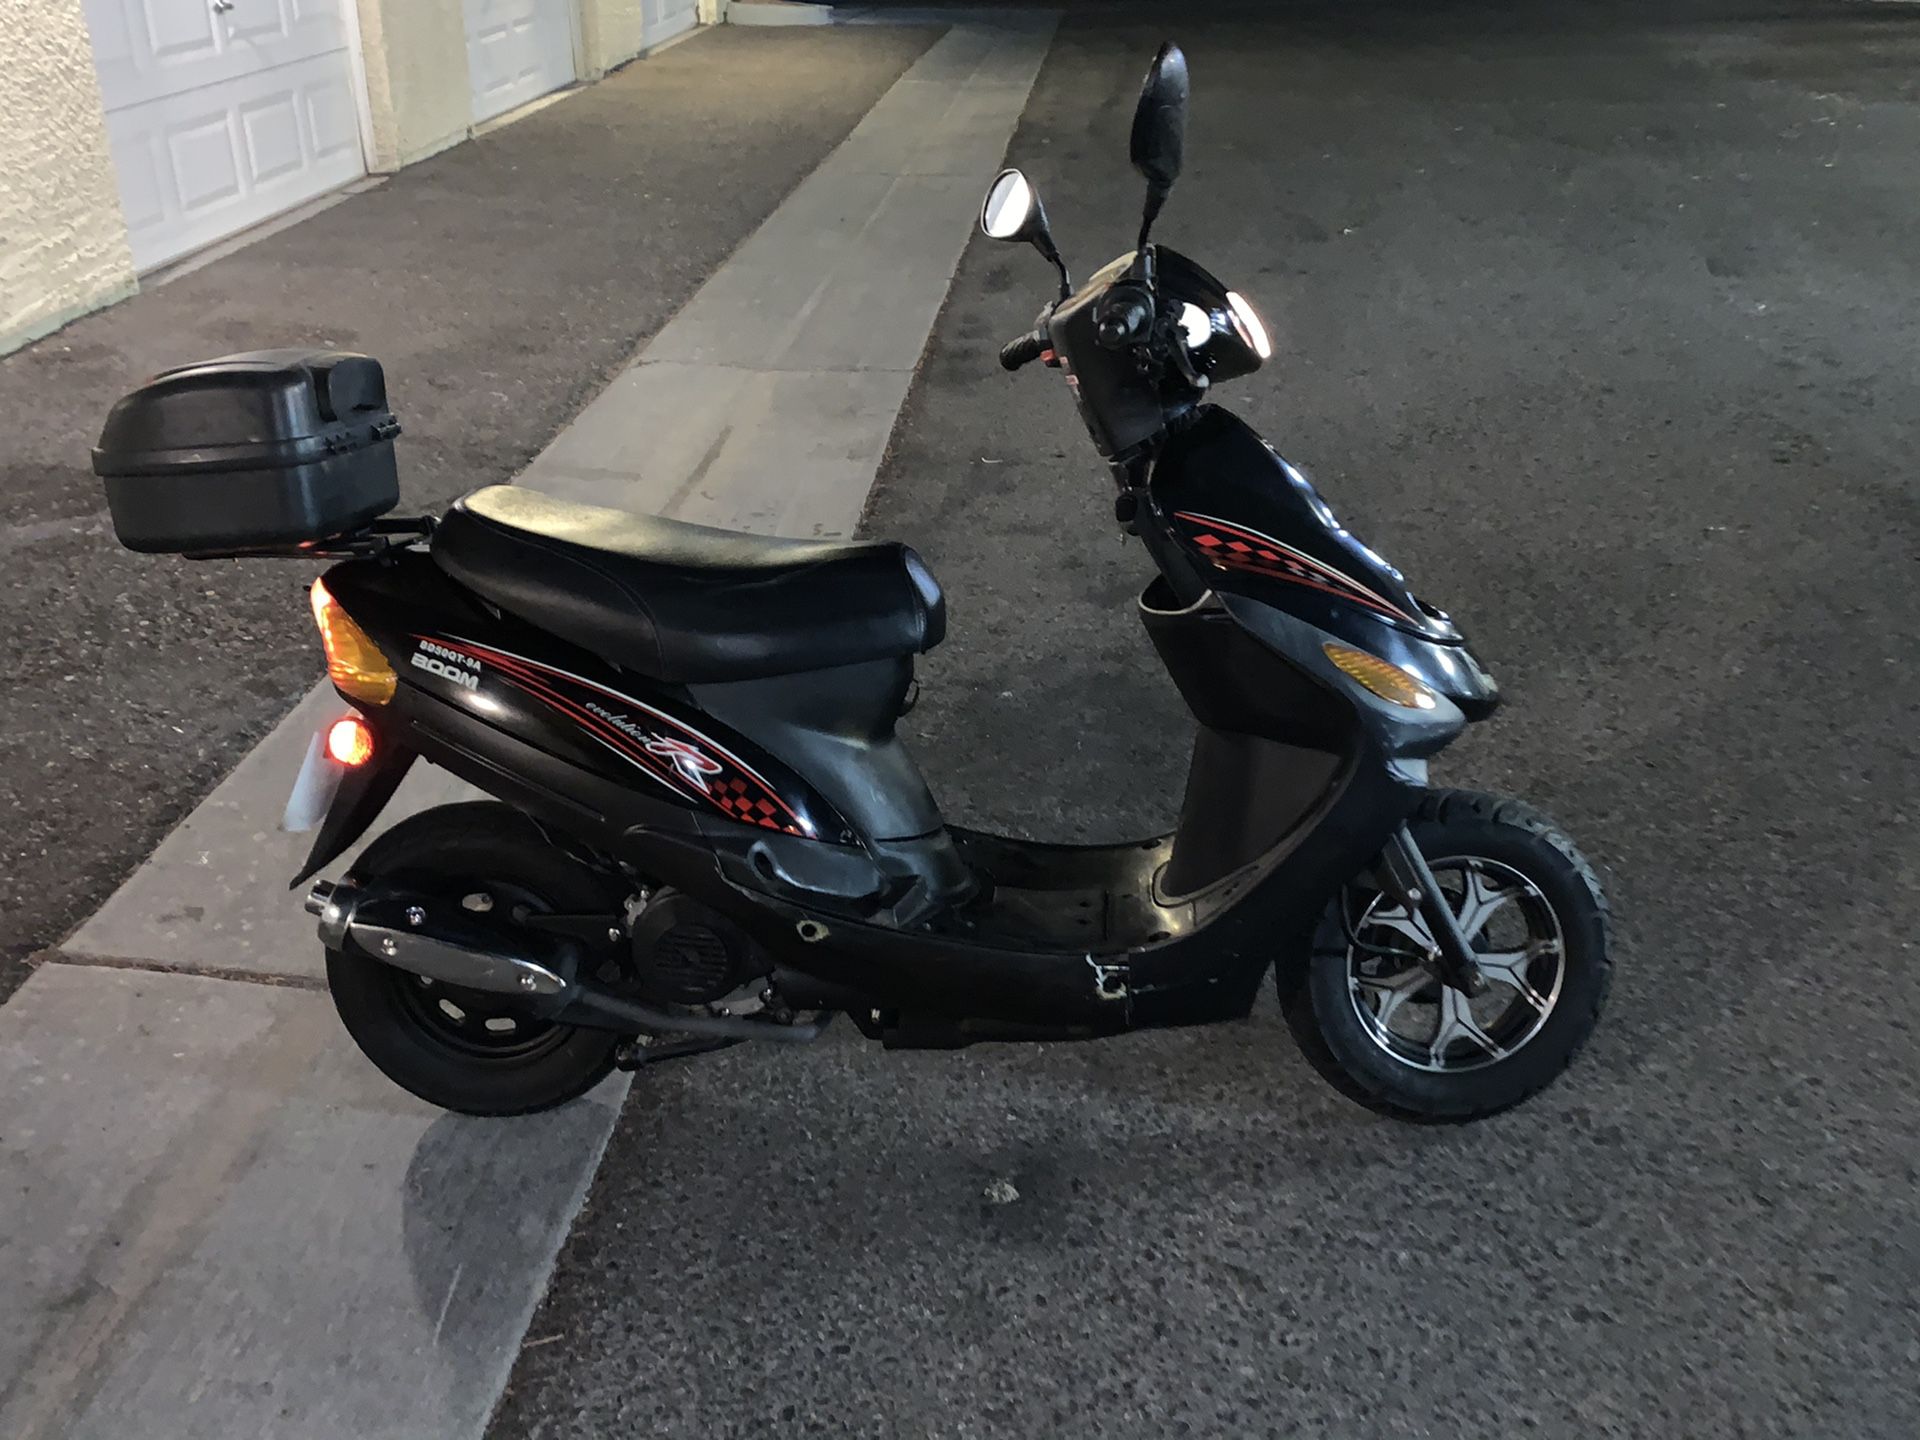 Moped/scooter